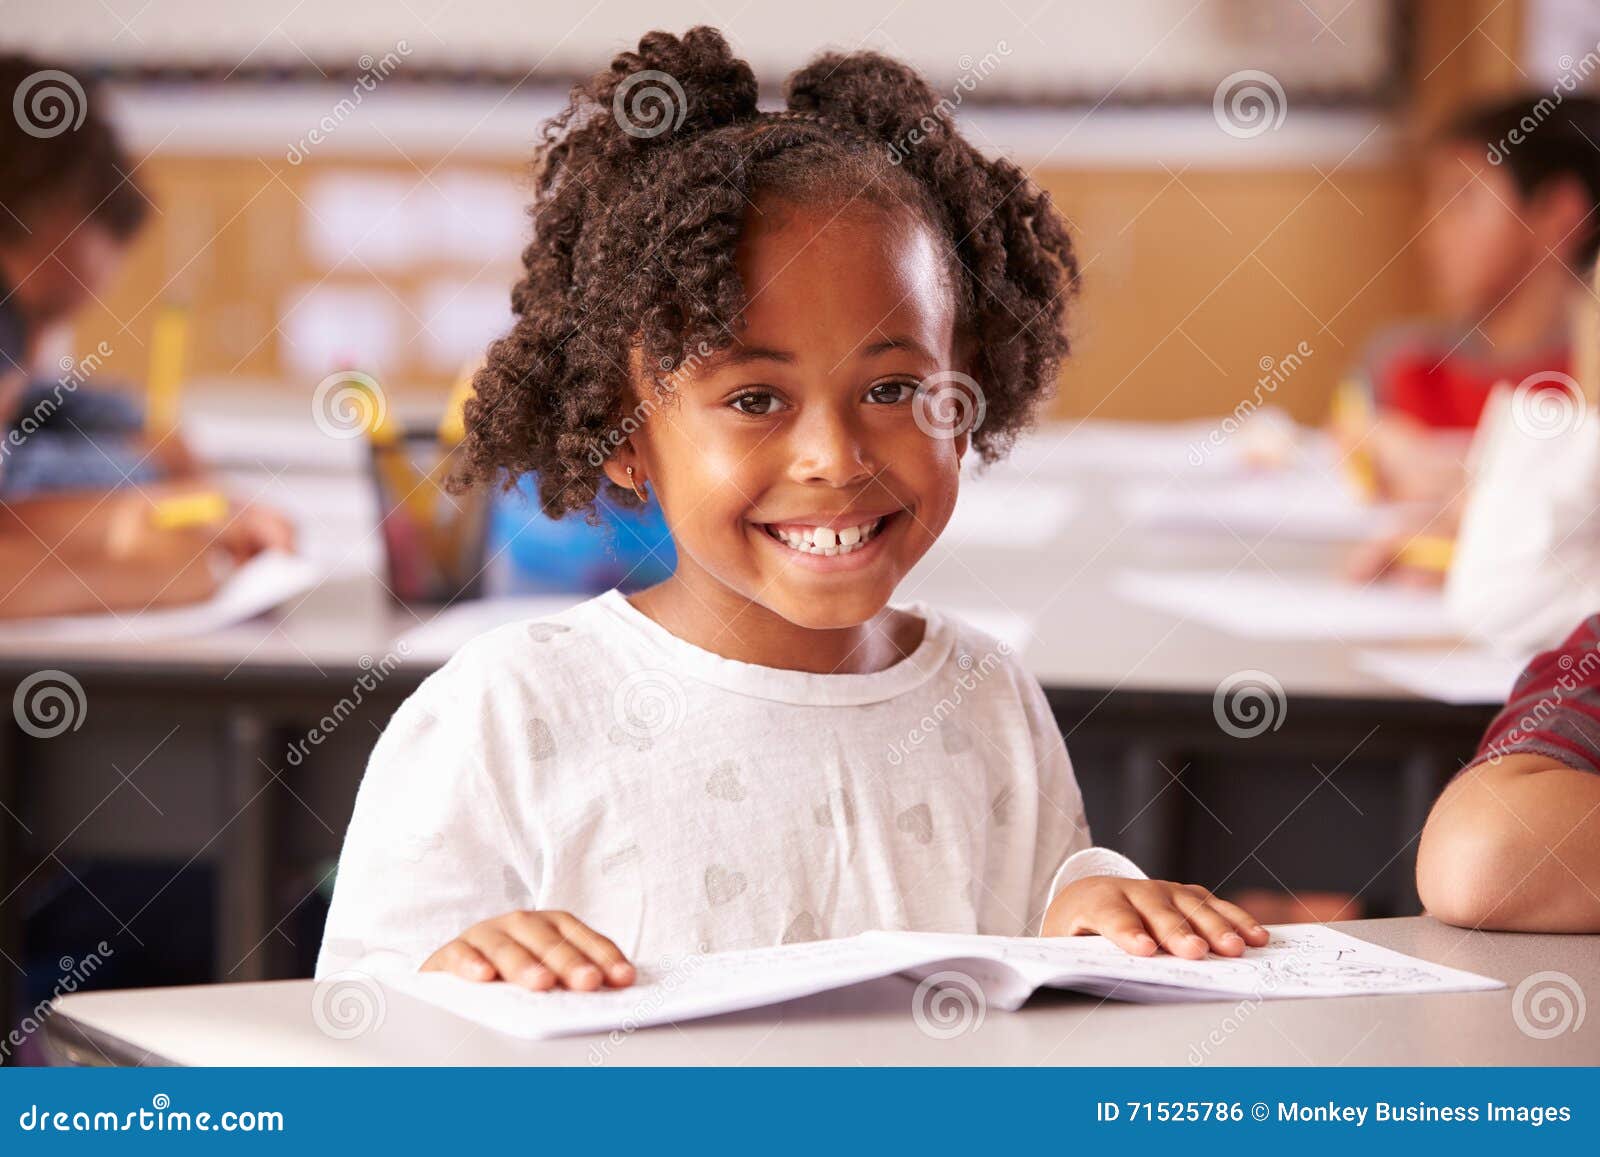 portrait of african american ary school girl in class